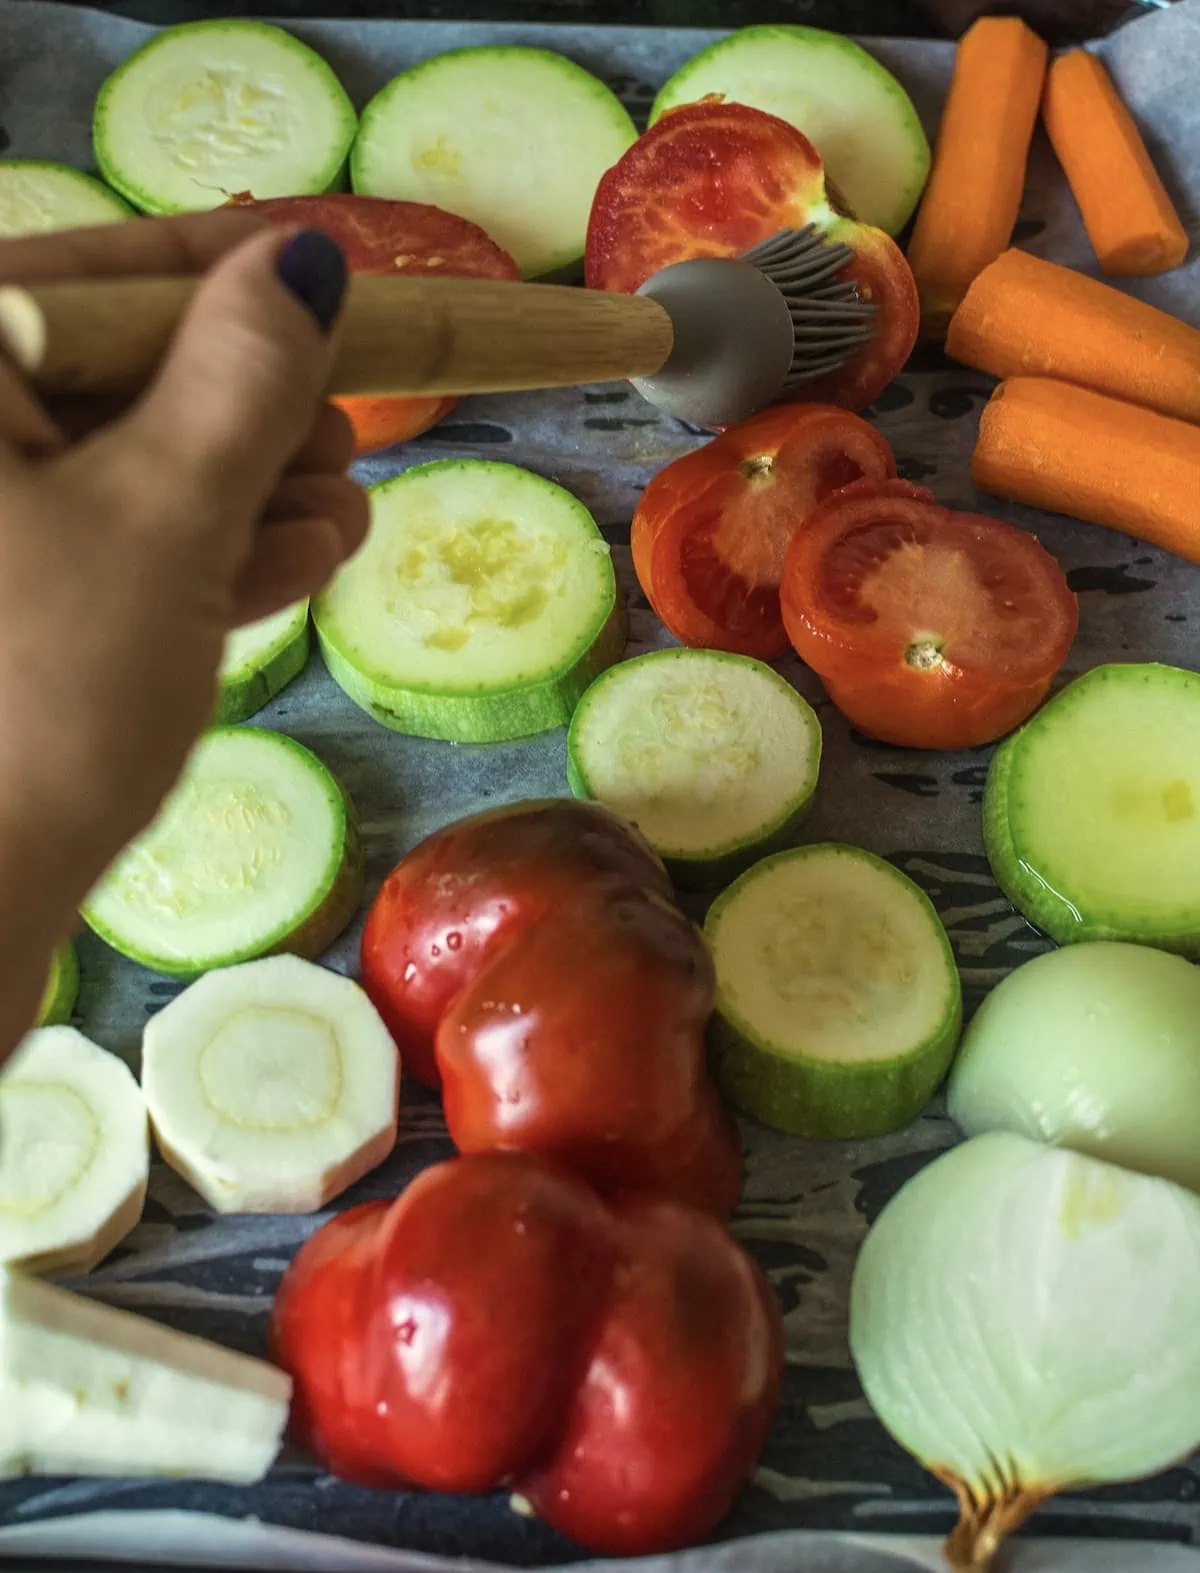 A person is preparing vegetables by brushing oil on them.